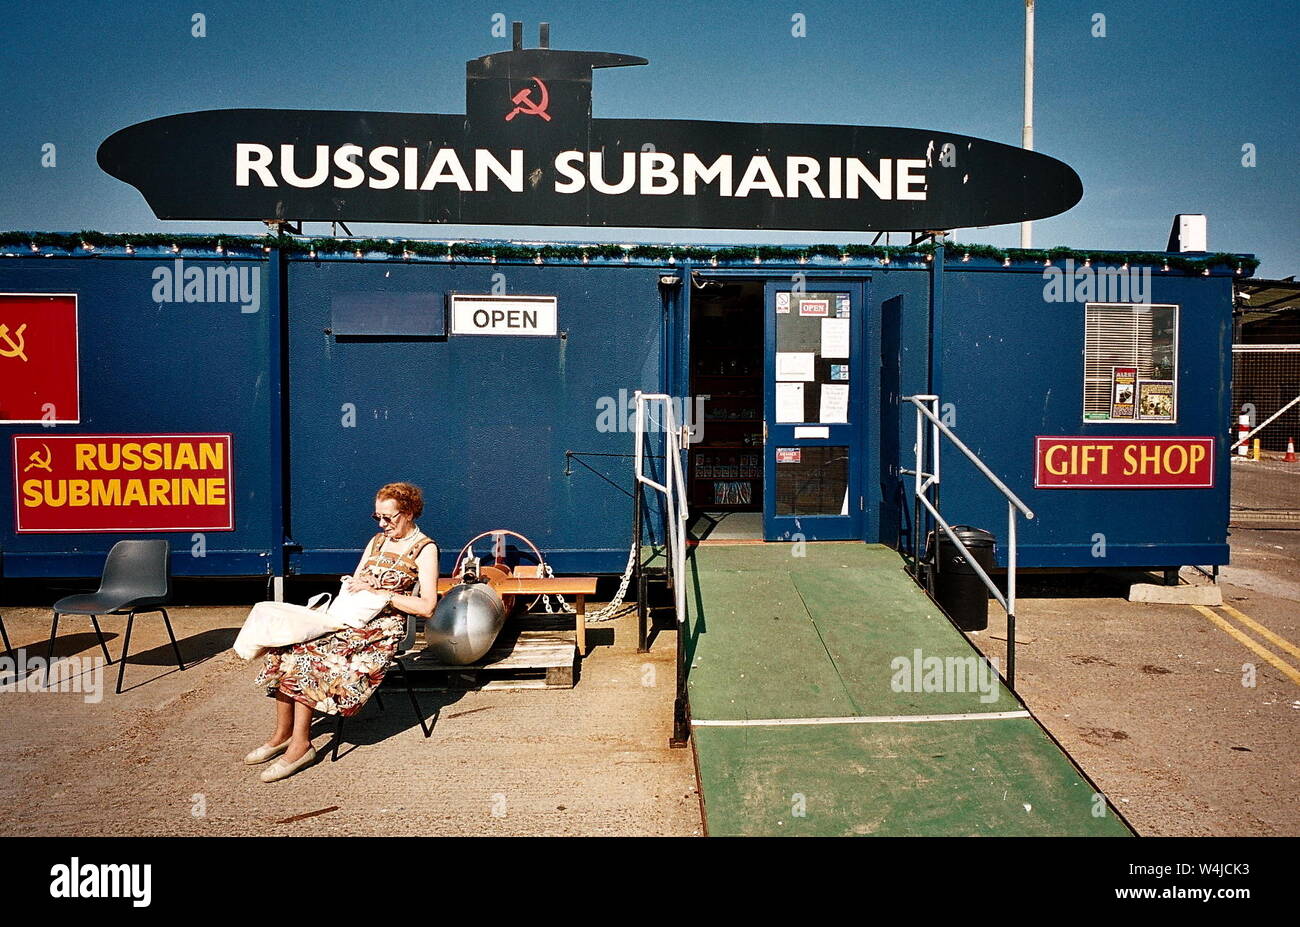 AJAXNETPHOTO. 2001. FOLKESTONE, ENGLAND. - RUSSIAN SUB MUSEUM - PICTURED IN JULY 2001. KIOSK AND ENTRANCE ON THE QUAY. VESSEL'S OWNERS APPLIED TO PLA FOR A BERTH ON THE THAMES.  PHOTO:JONATHAN EASTLAND/AJAX.  REF: TC 4897 24 23A. Stock Photo